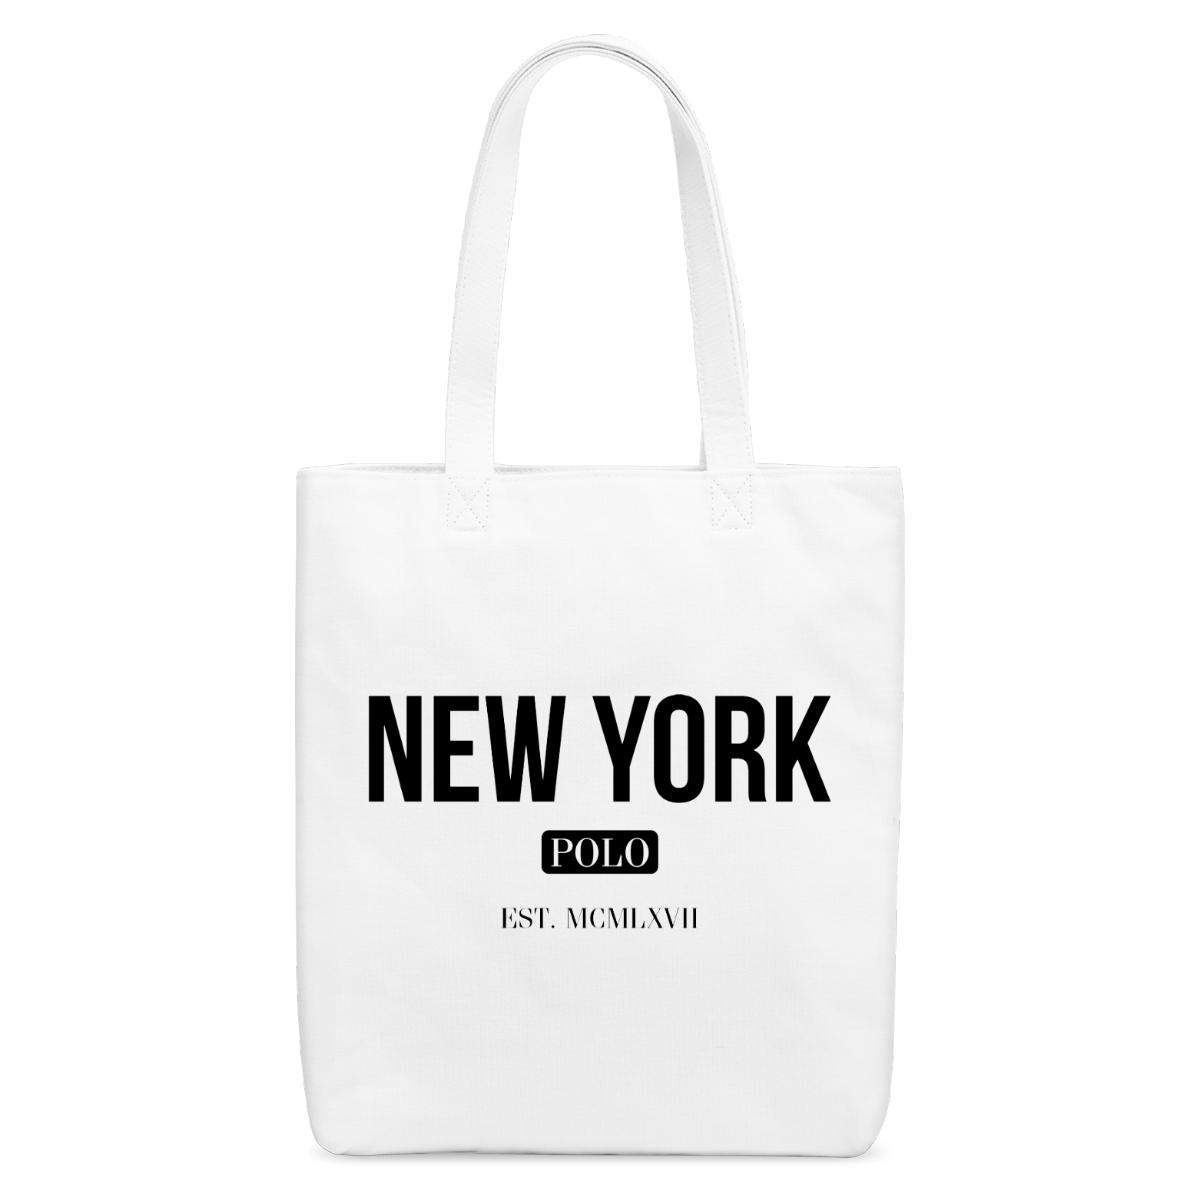  DISCOUNT PROMOS Custom Cotton Canvas Tote Bags Set of